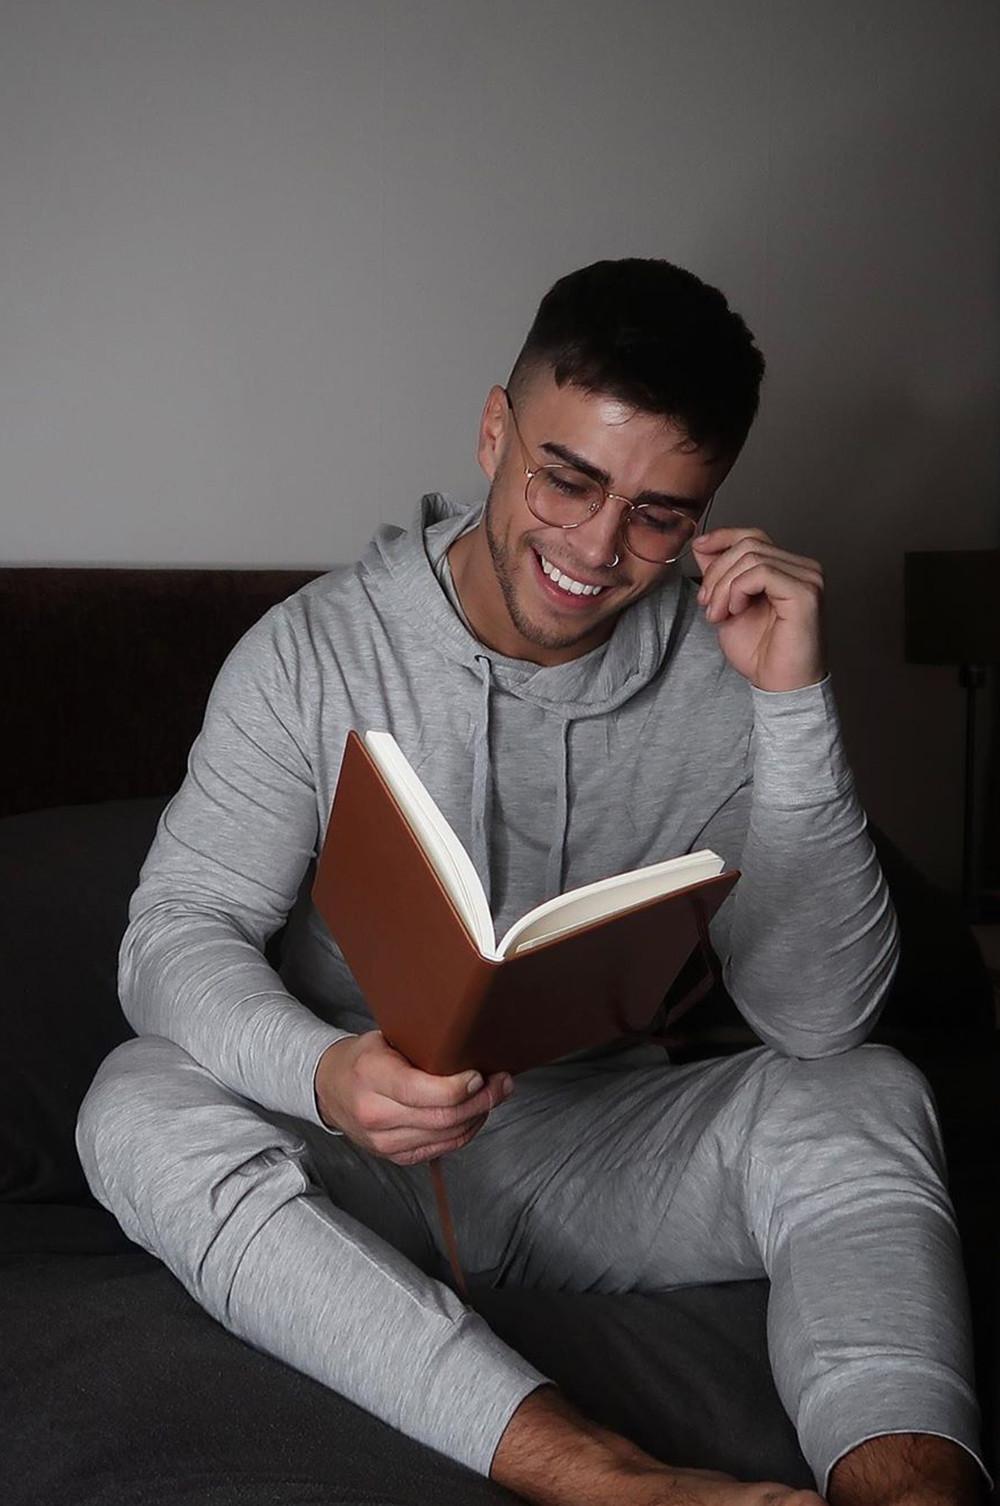 A man reading a book in a grey Primark tracksuit